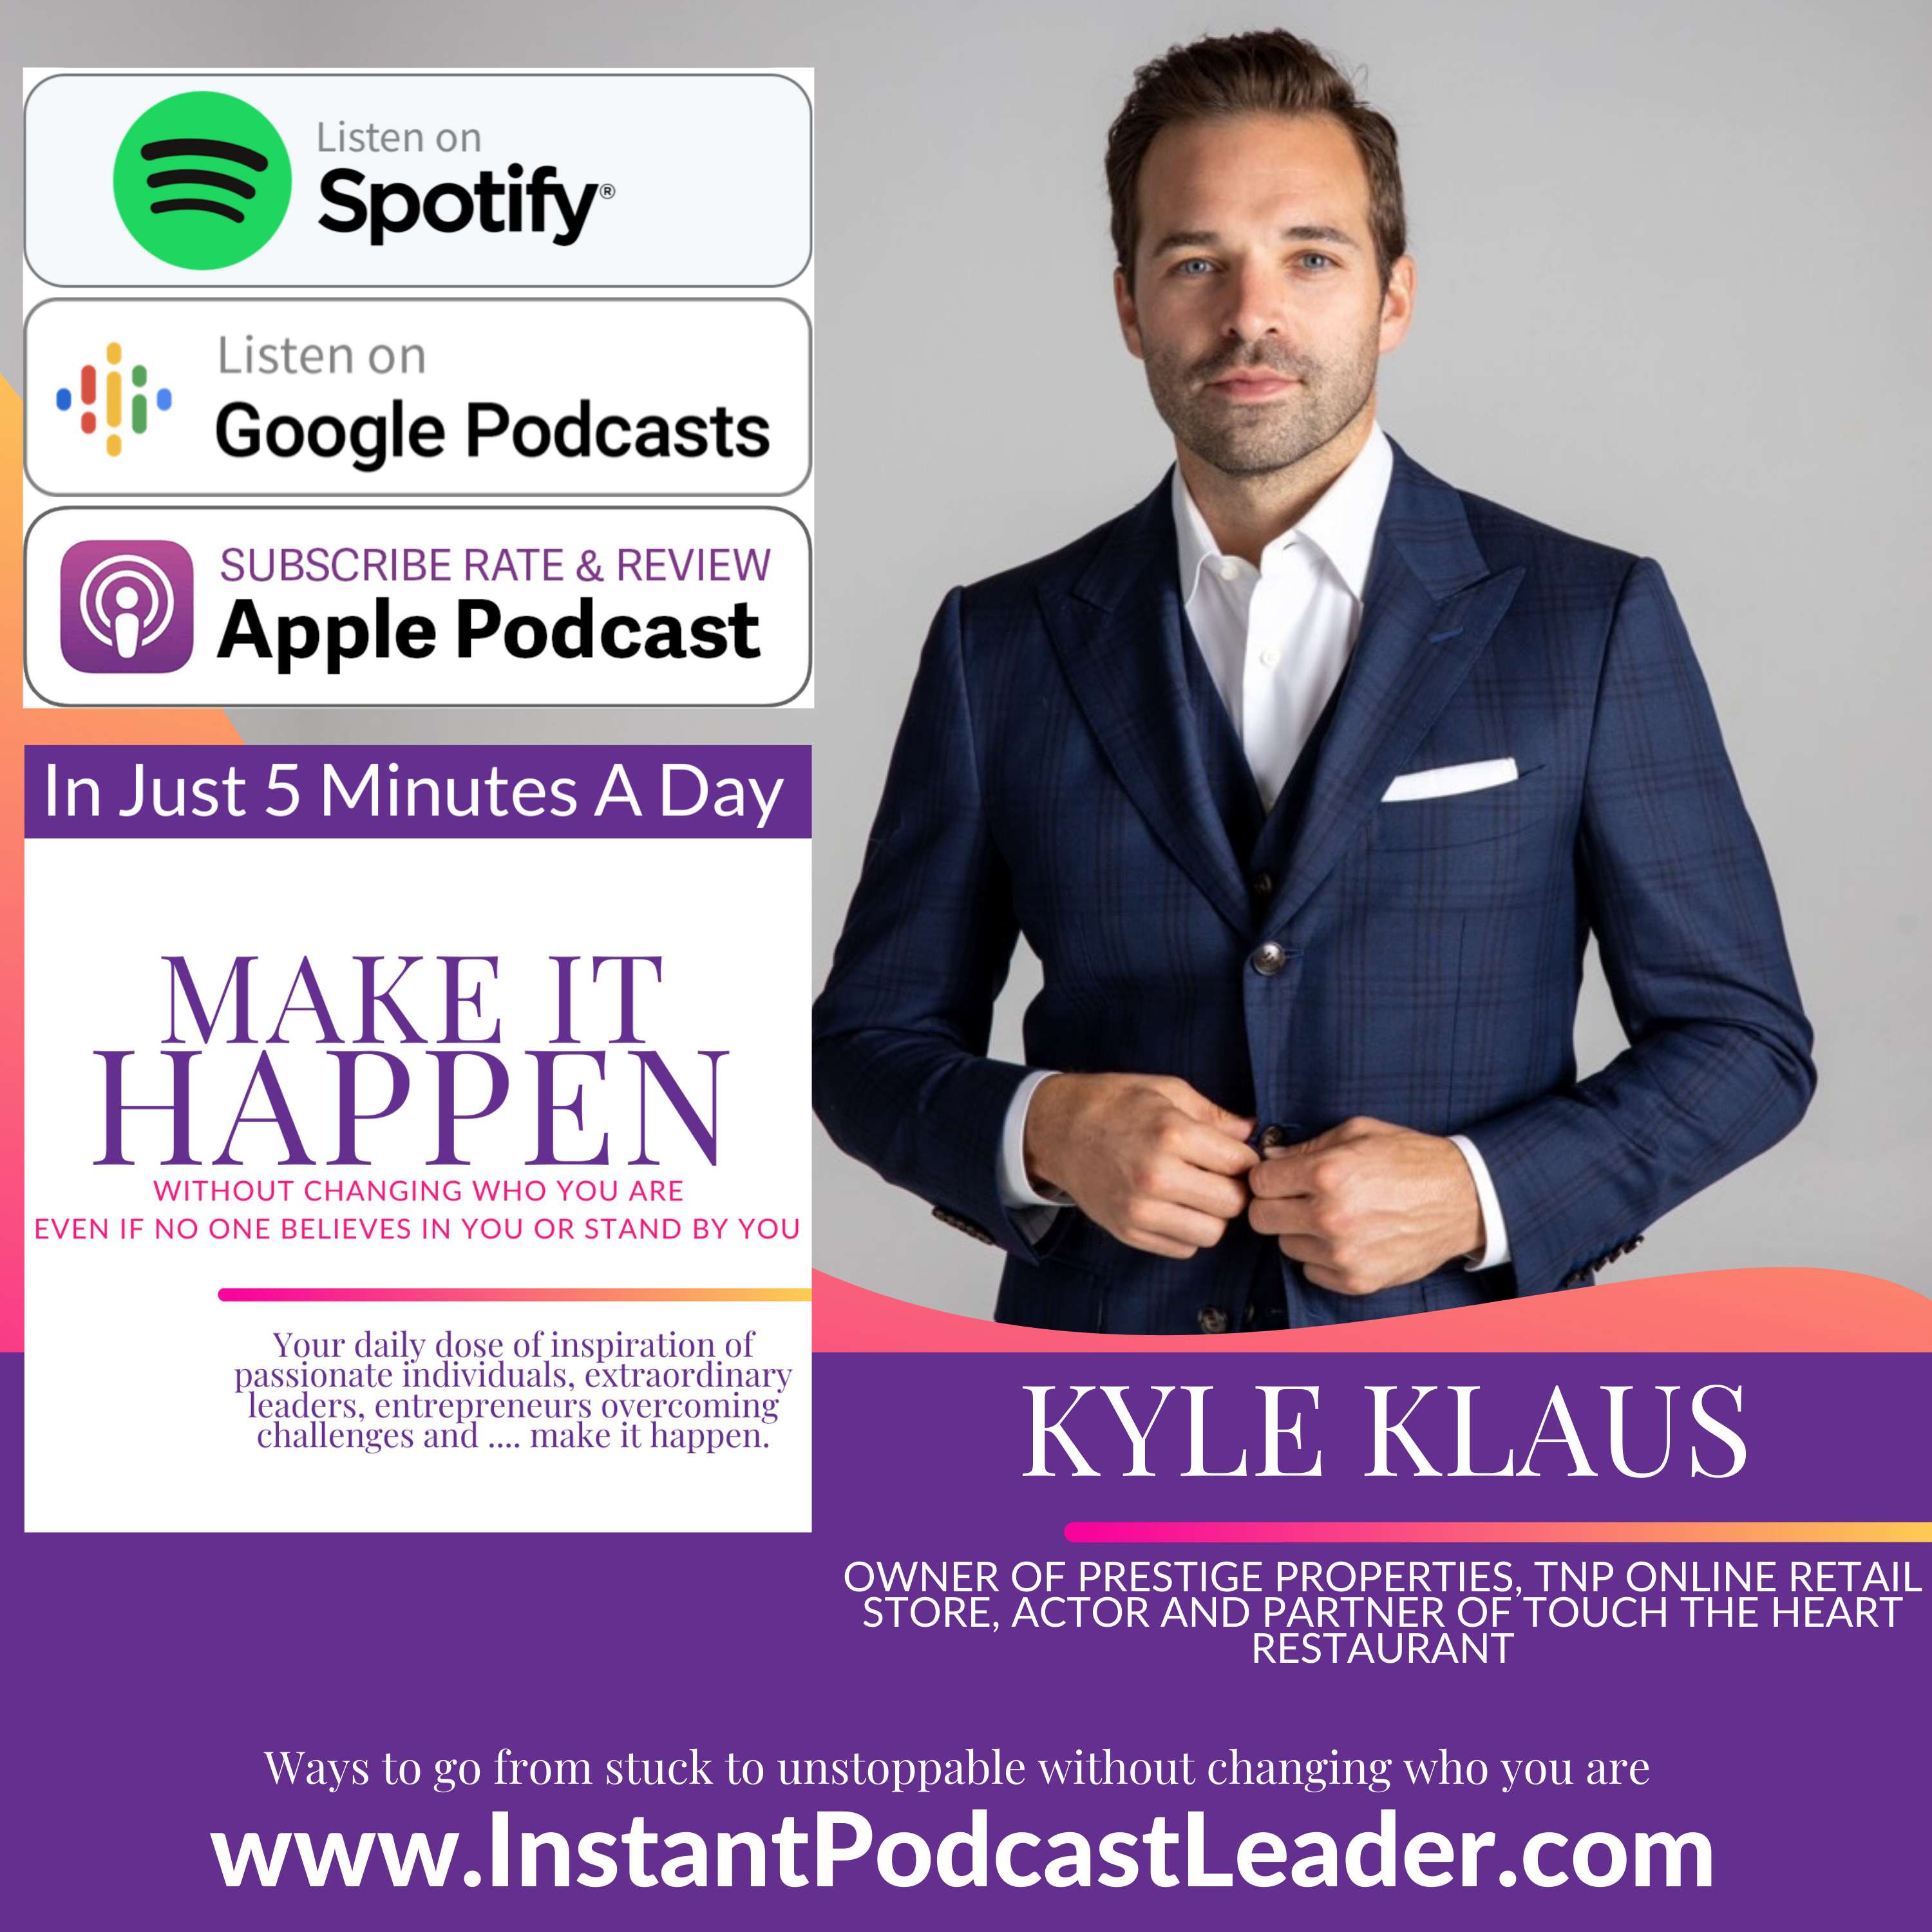 MIH EP37 Kyle Klaus Owner of Prestige Properties, TNP online retail store, Actor and Partner of Touch The Heart Restaurant